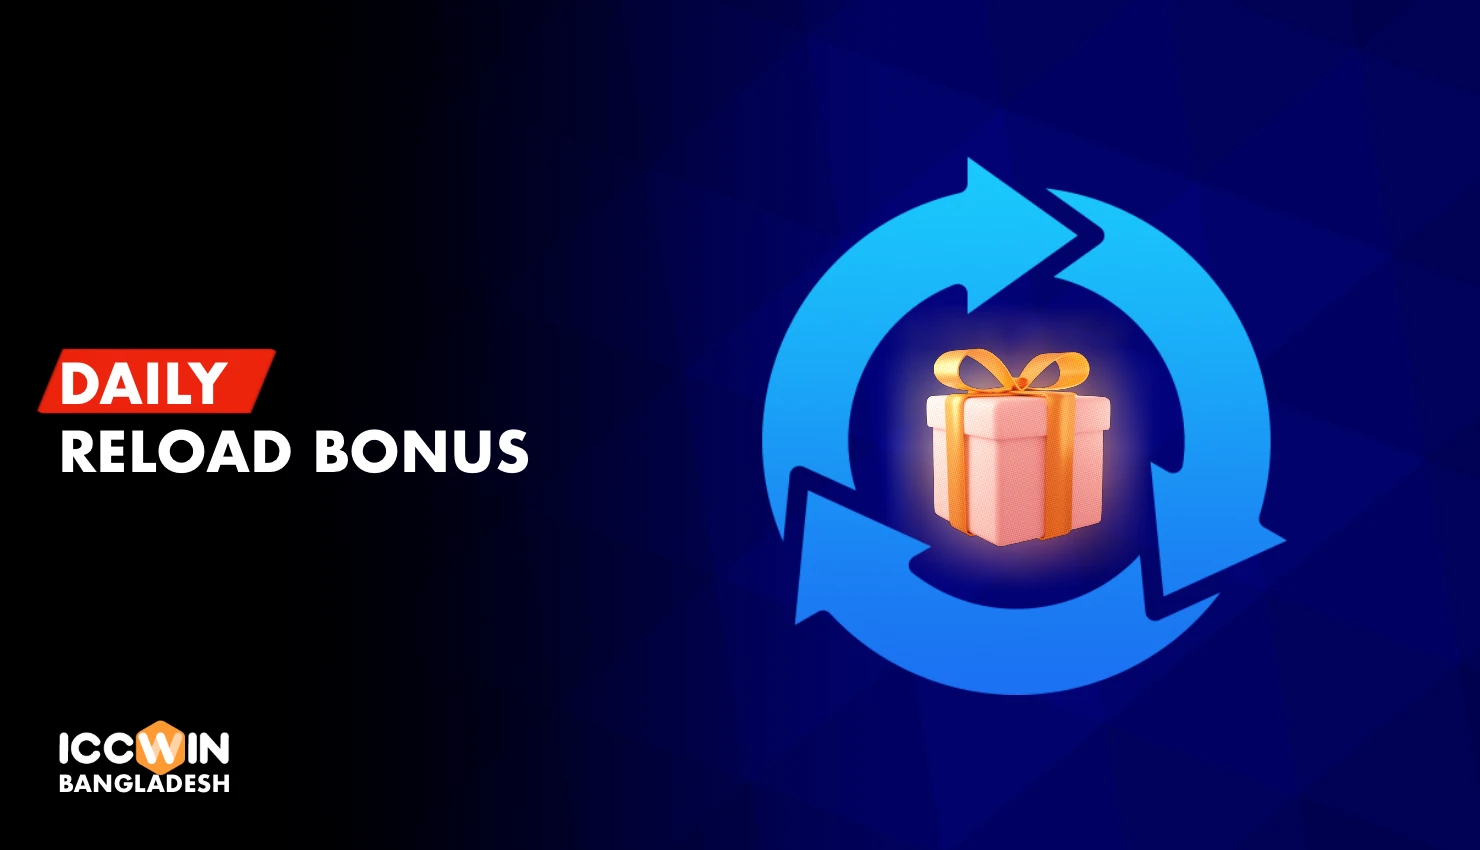 Daily reload bonus at Iccwin applies to casino sections and slots